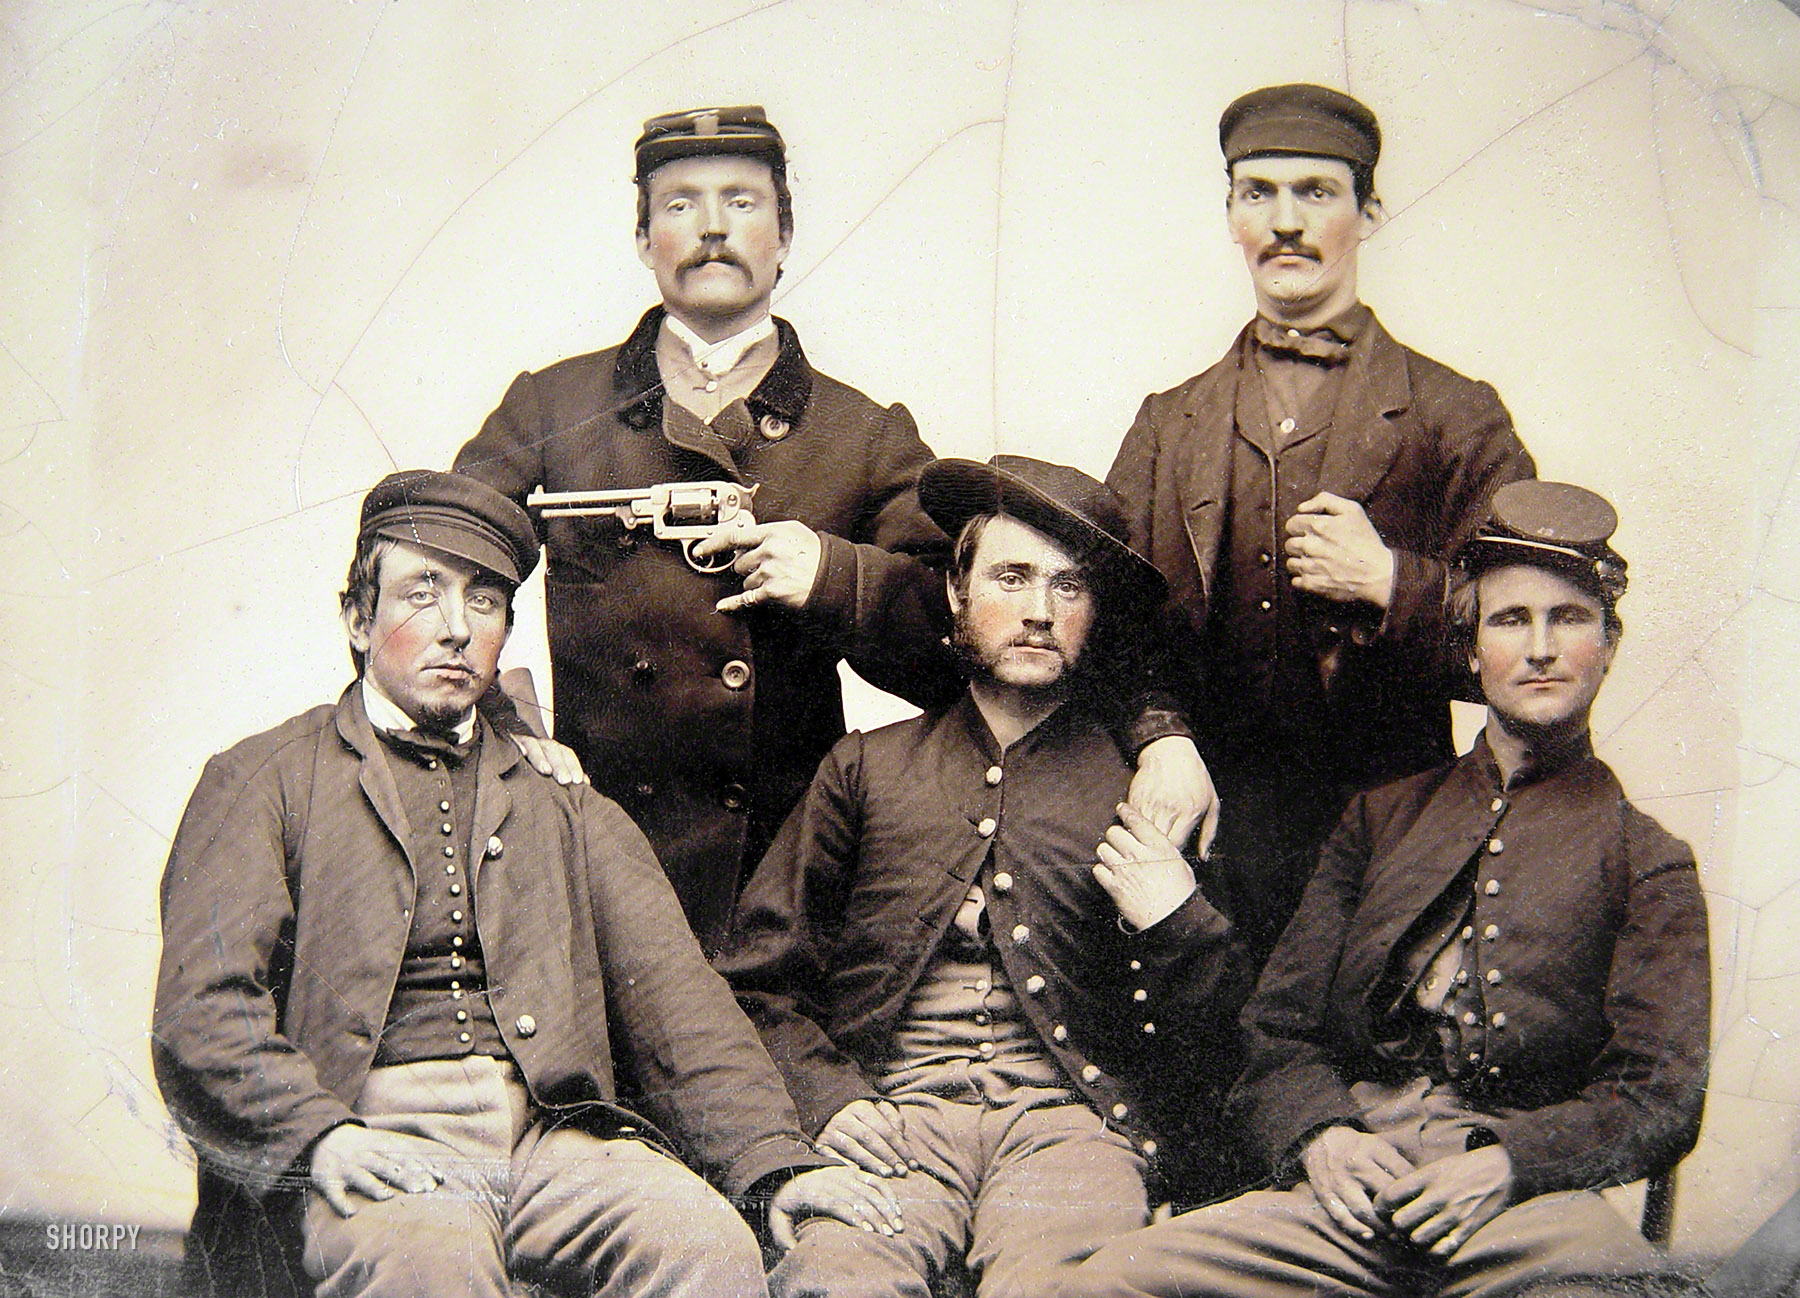 More Civil War cutups. "Unidentified men in Union uniforms, one pointing a revolver at another's head." Half-plate tintype, hand-colored. Liljenquist Family Collection of Civil War Photographs, Library of Congress. View full size.